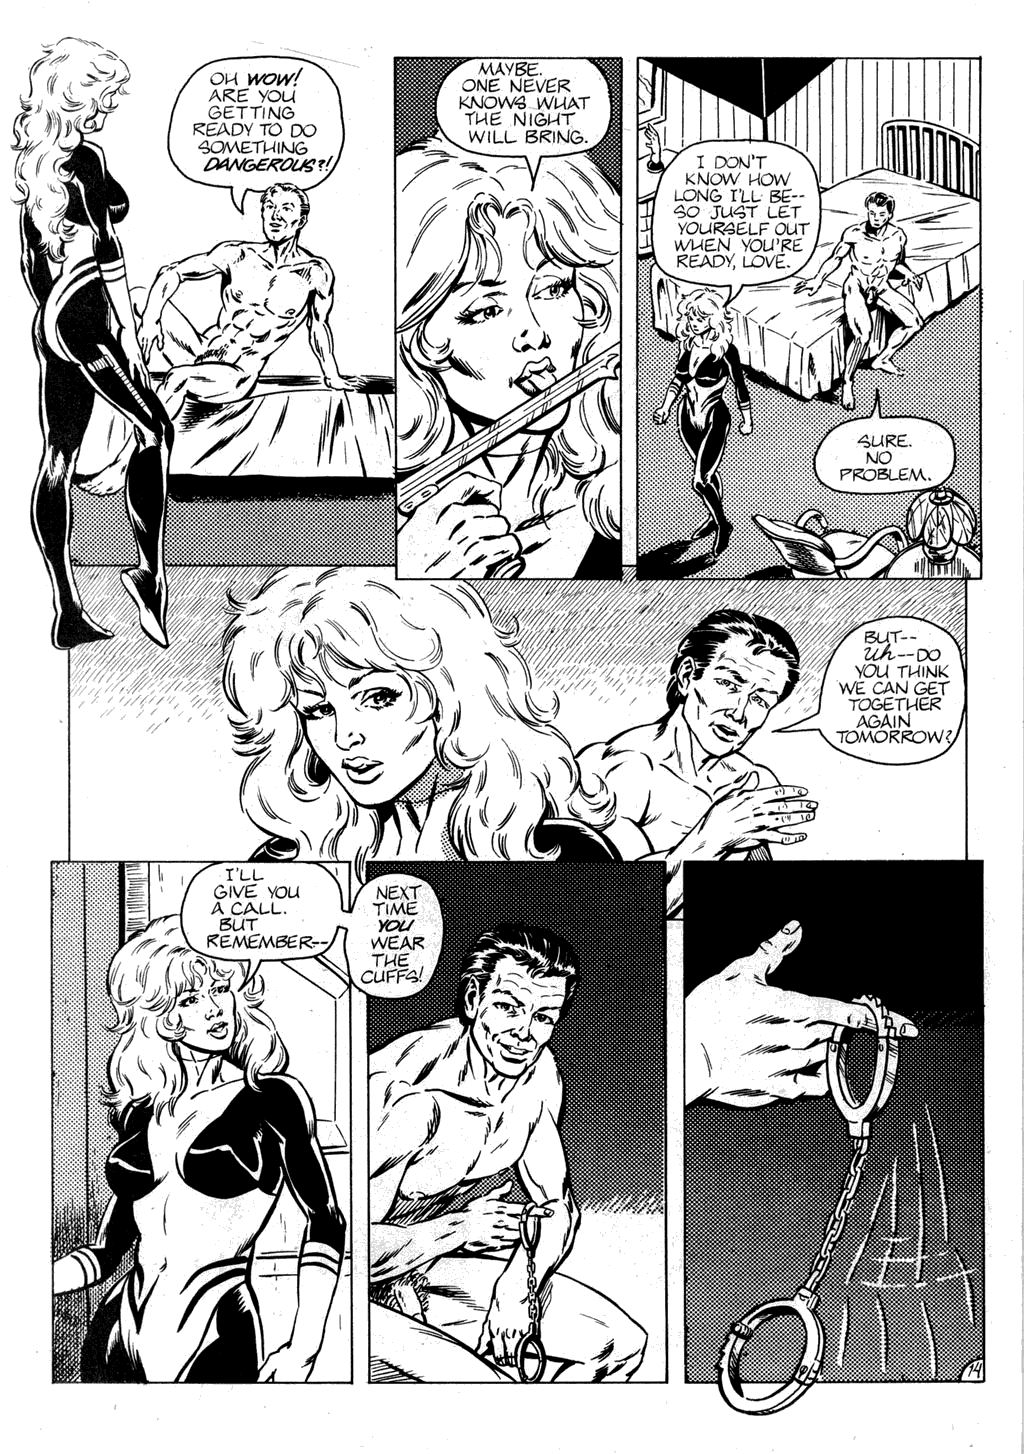 Scimidar Book IV: Wild Thing issue 1 - Page 15